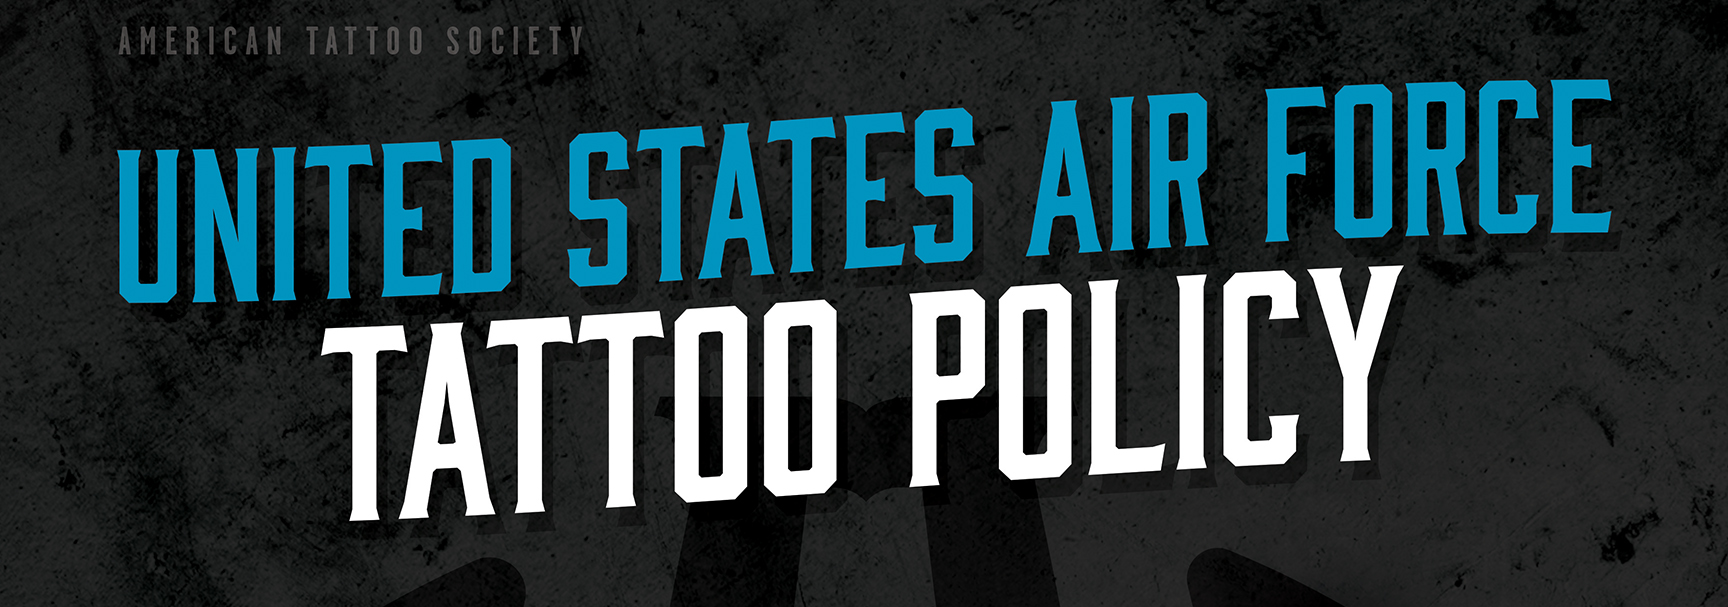 Air Force Tattoo Policy ( Updated for 2022) | American Tattoo Society